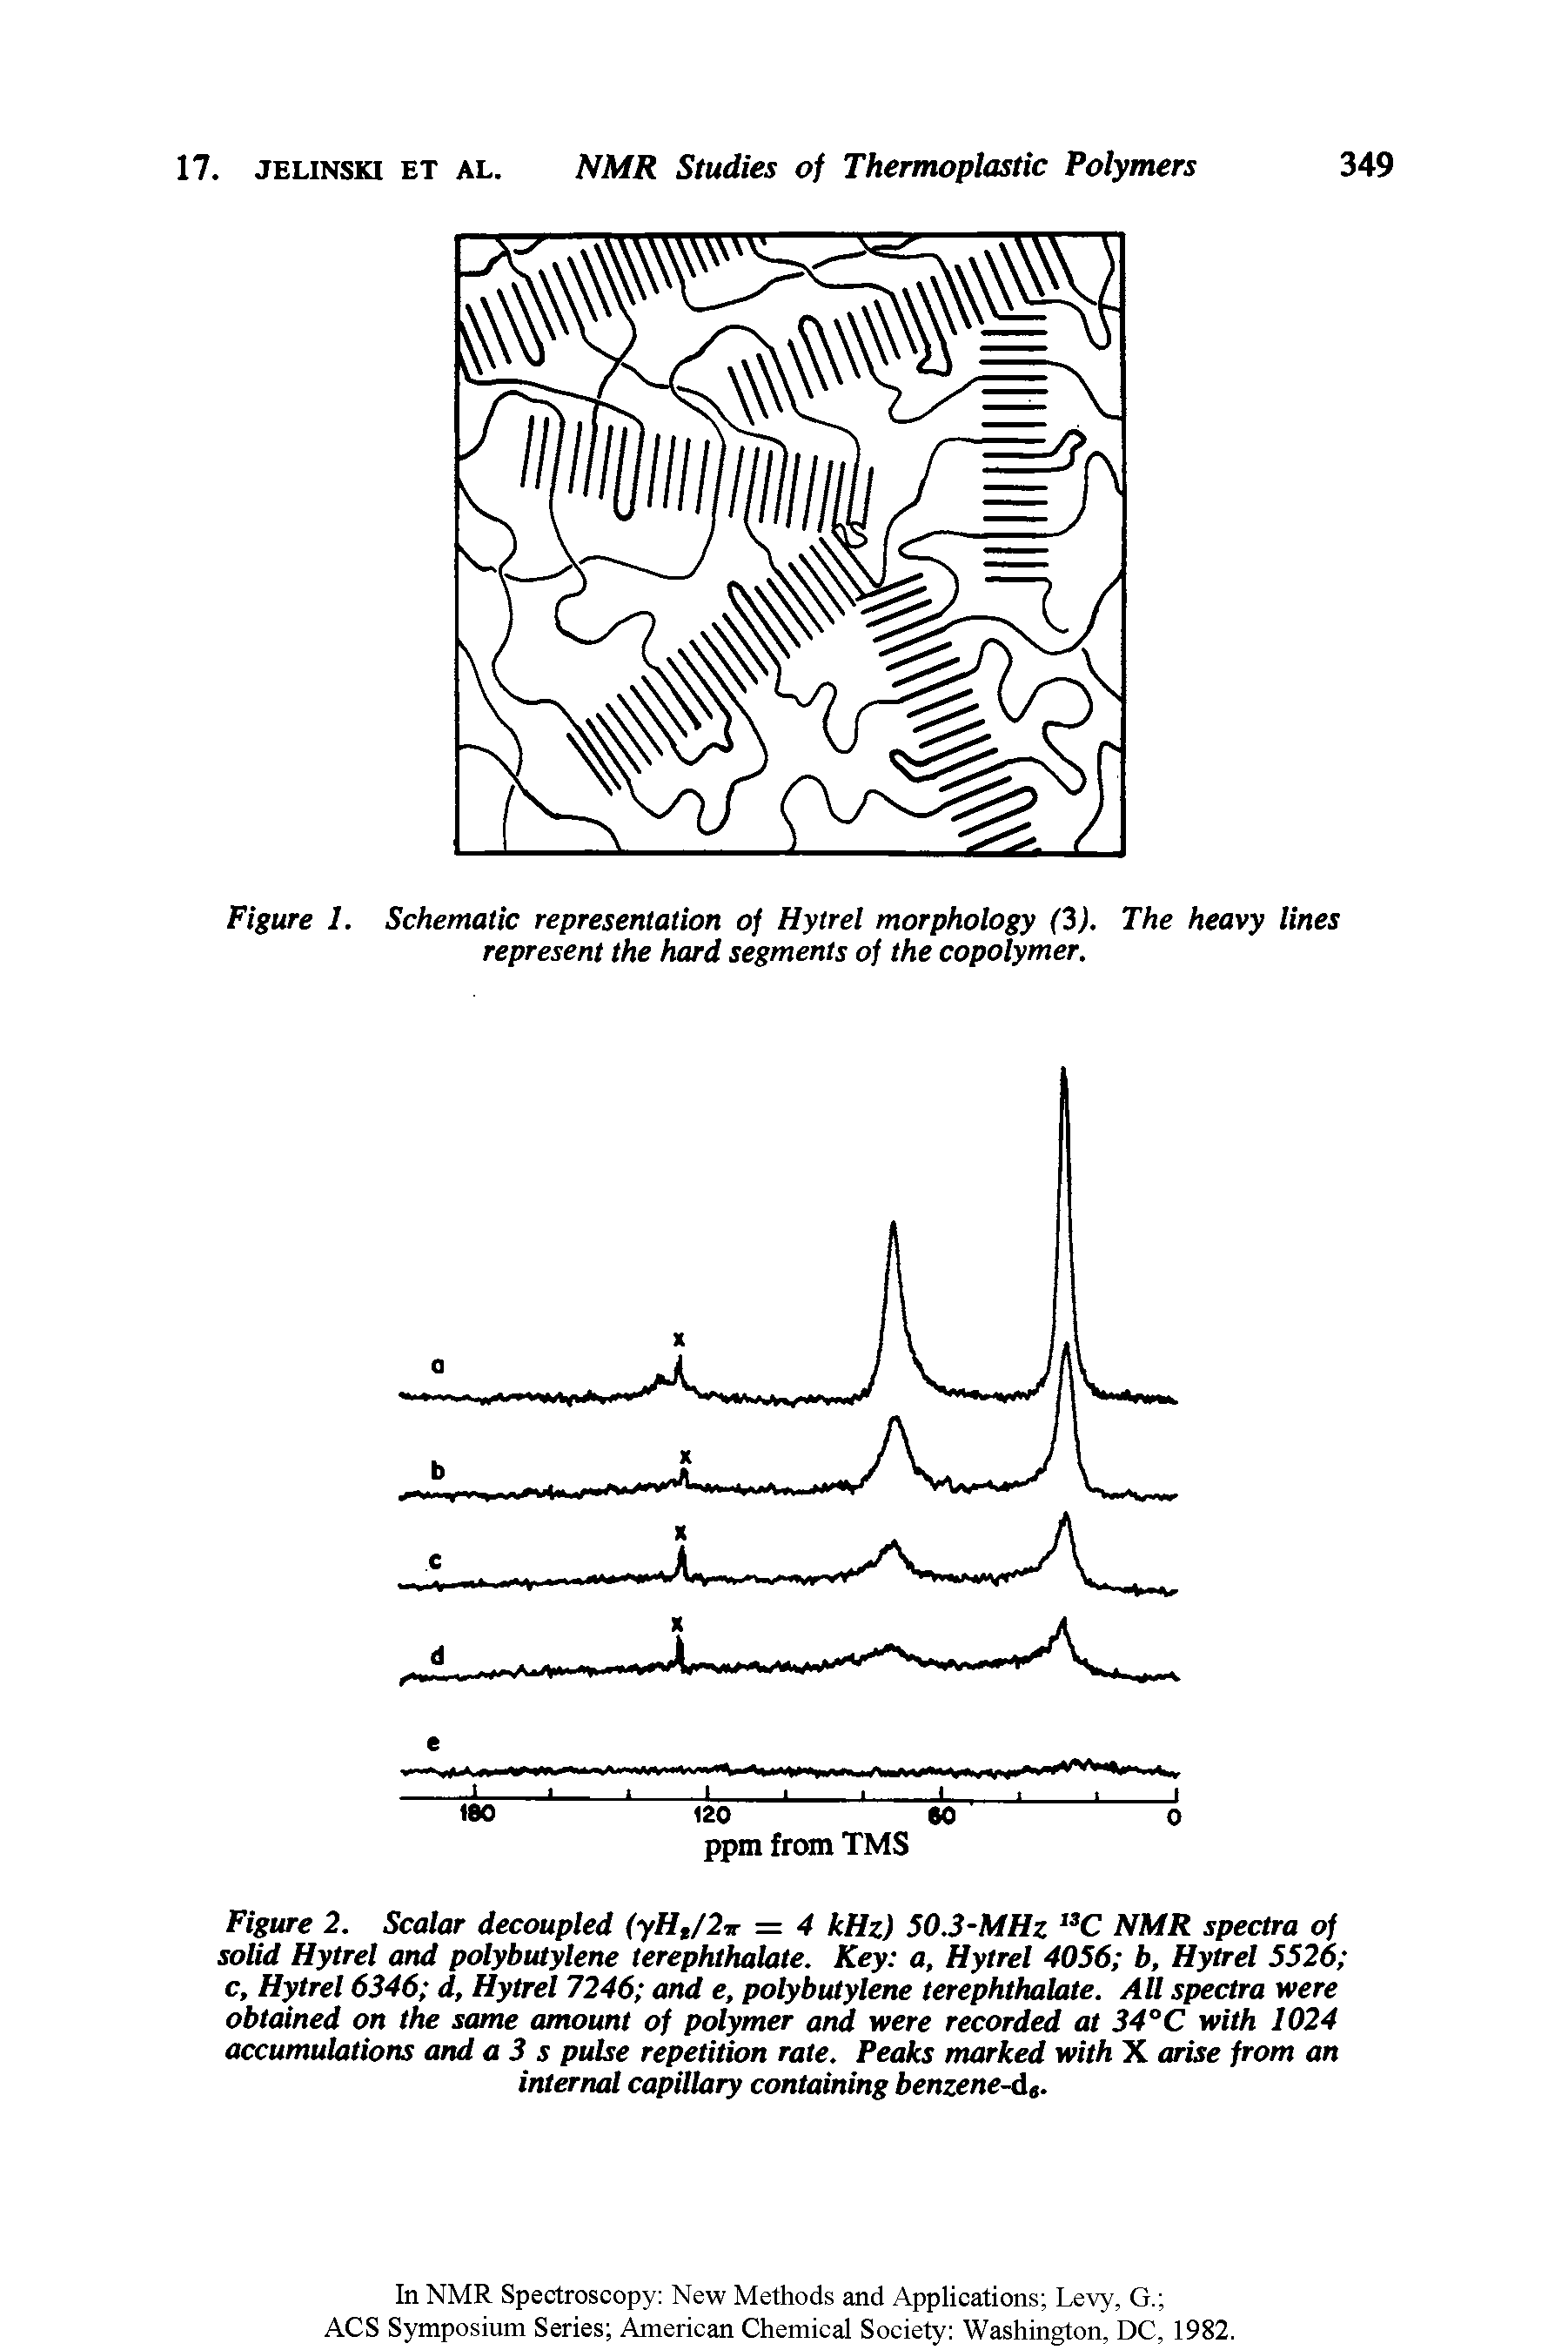 Figure 2. Scalar decoupled (yHt/2ir = 4 kHz) 50.3-MHz C NMR spectra of solid Hytrel and polybutylene terephthalate. Key a, Hytrel 4056 b, Hytrel 5526 c, Hytrel 6346 d, Hytrel 7246 and e, polybutylene terephthalate. All spectra were obtained on the same amount of polymer and were recorded at 34°C with 1024 accumulations and a 3 s pulse repetition rate. Peaks marked with X arise from an internal capillary containing benzene-df...